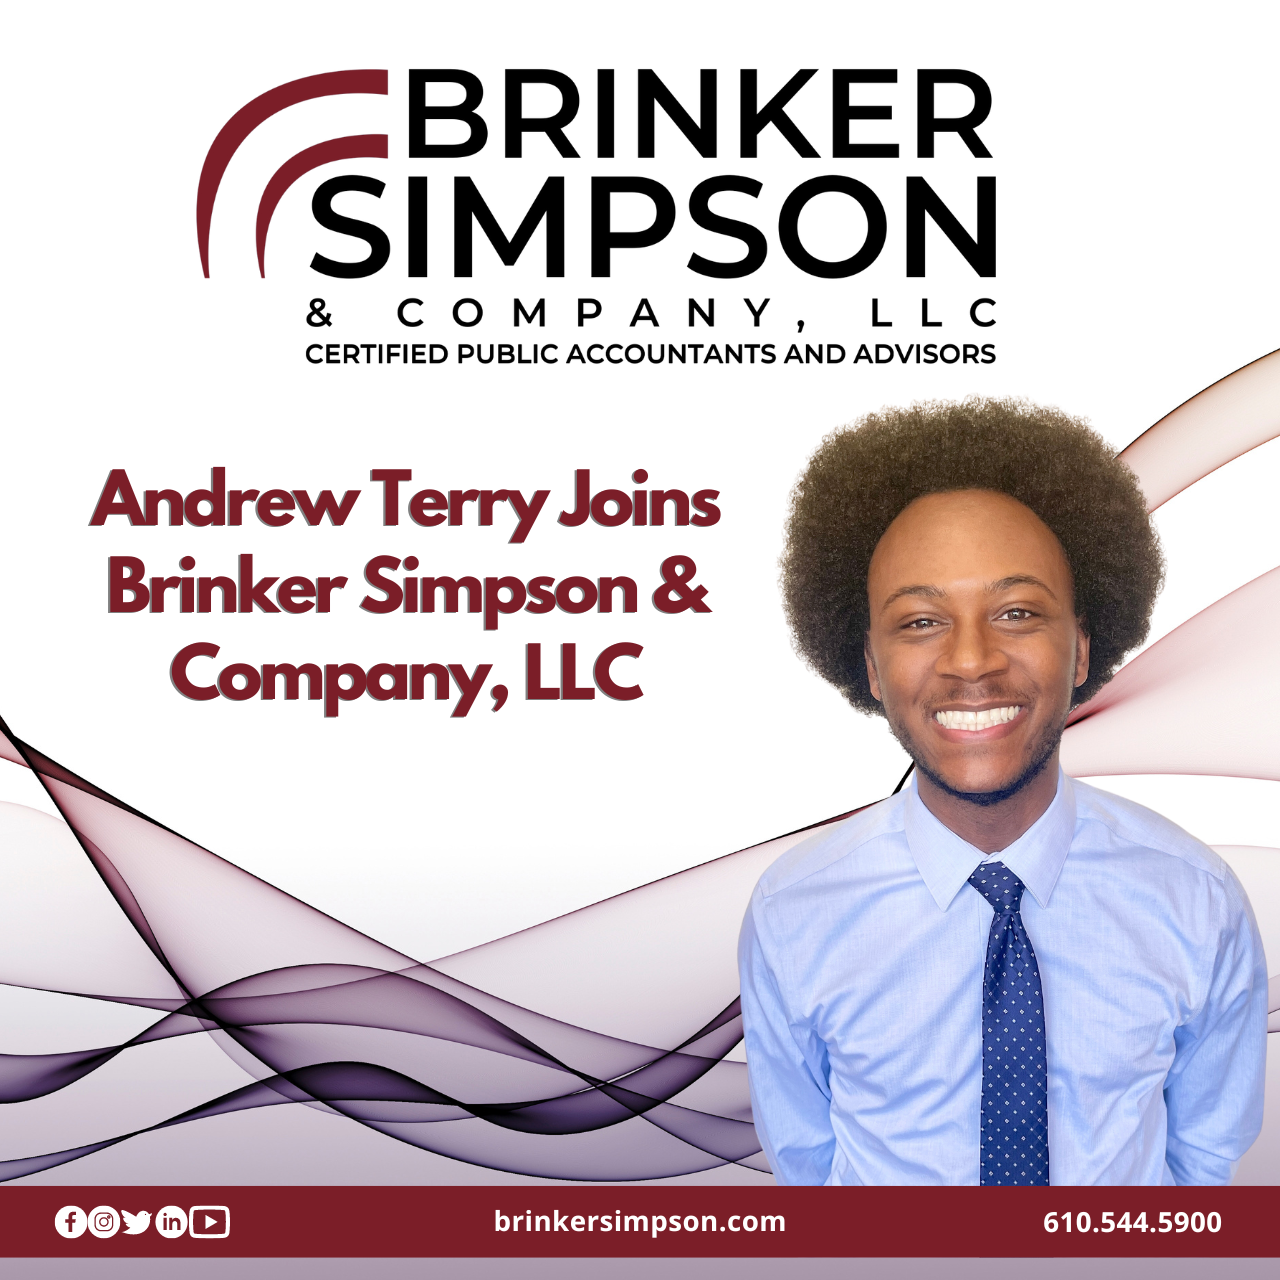 Andrew Terry Joins Brinker Simpson & Company, LLC